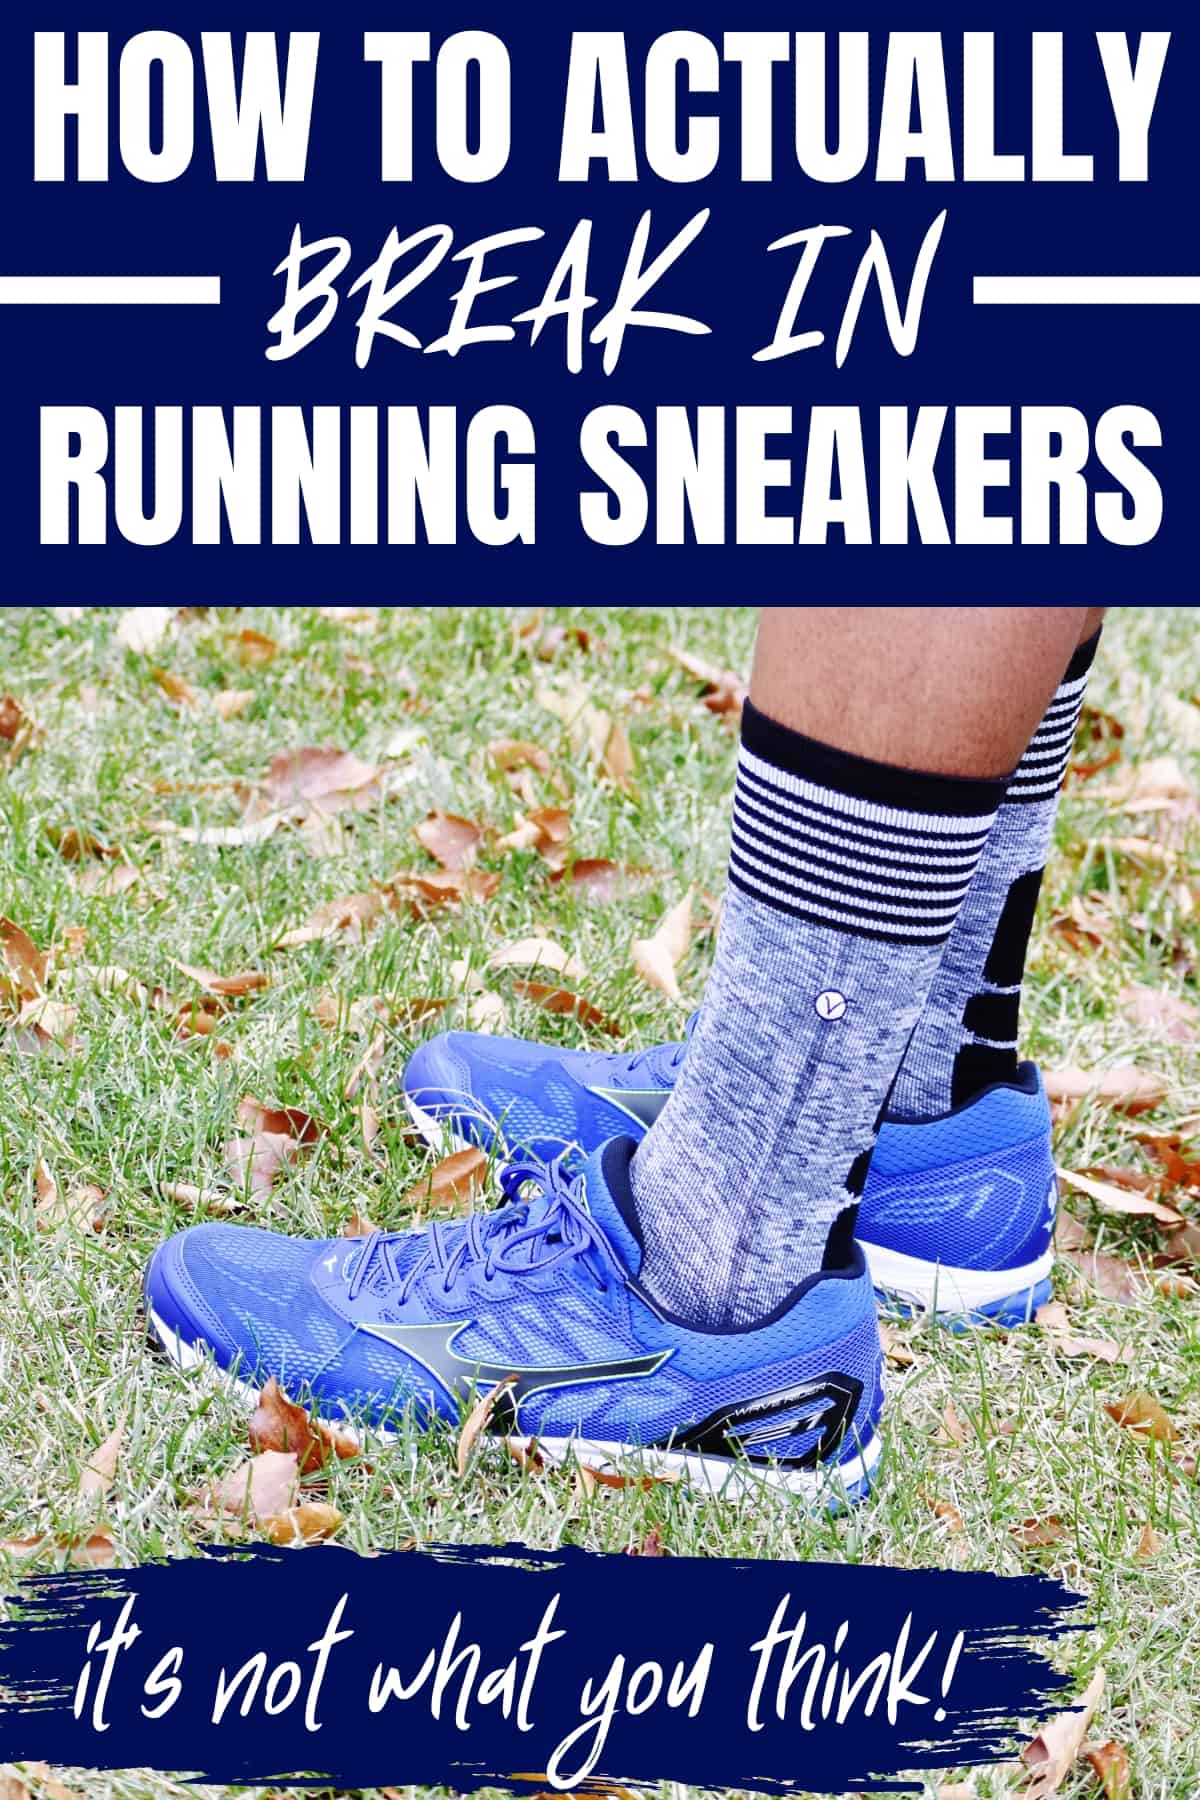 A male runner in blue sneakers standing in grass with a text overlay that says how to actually break in running sneakers.